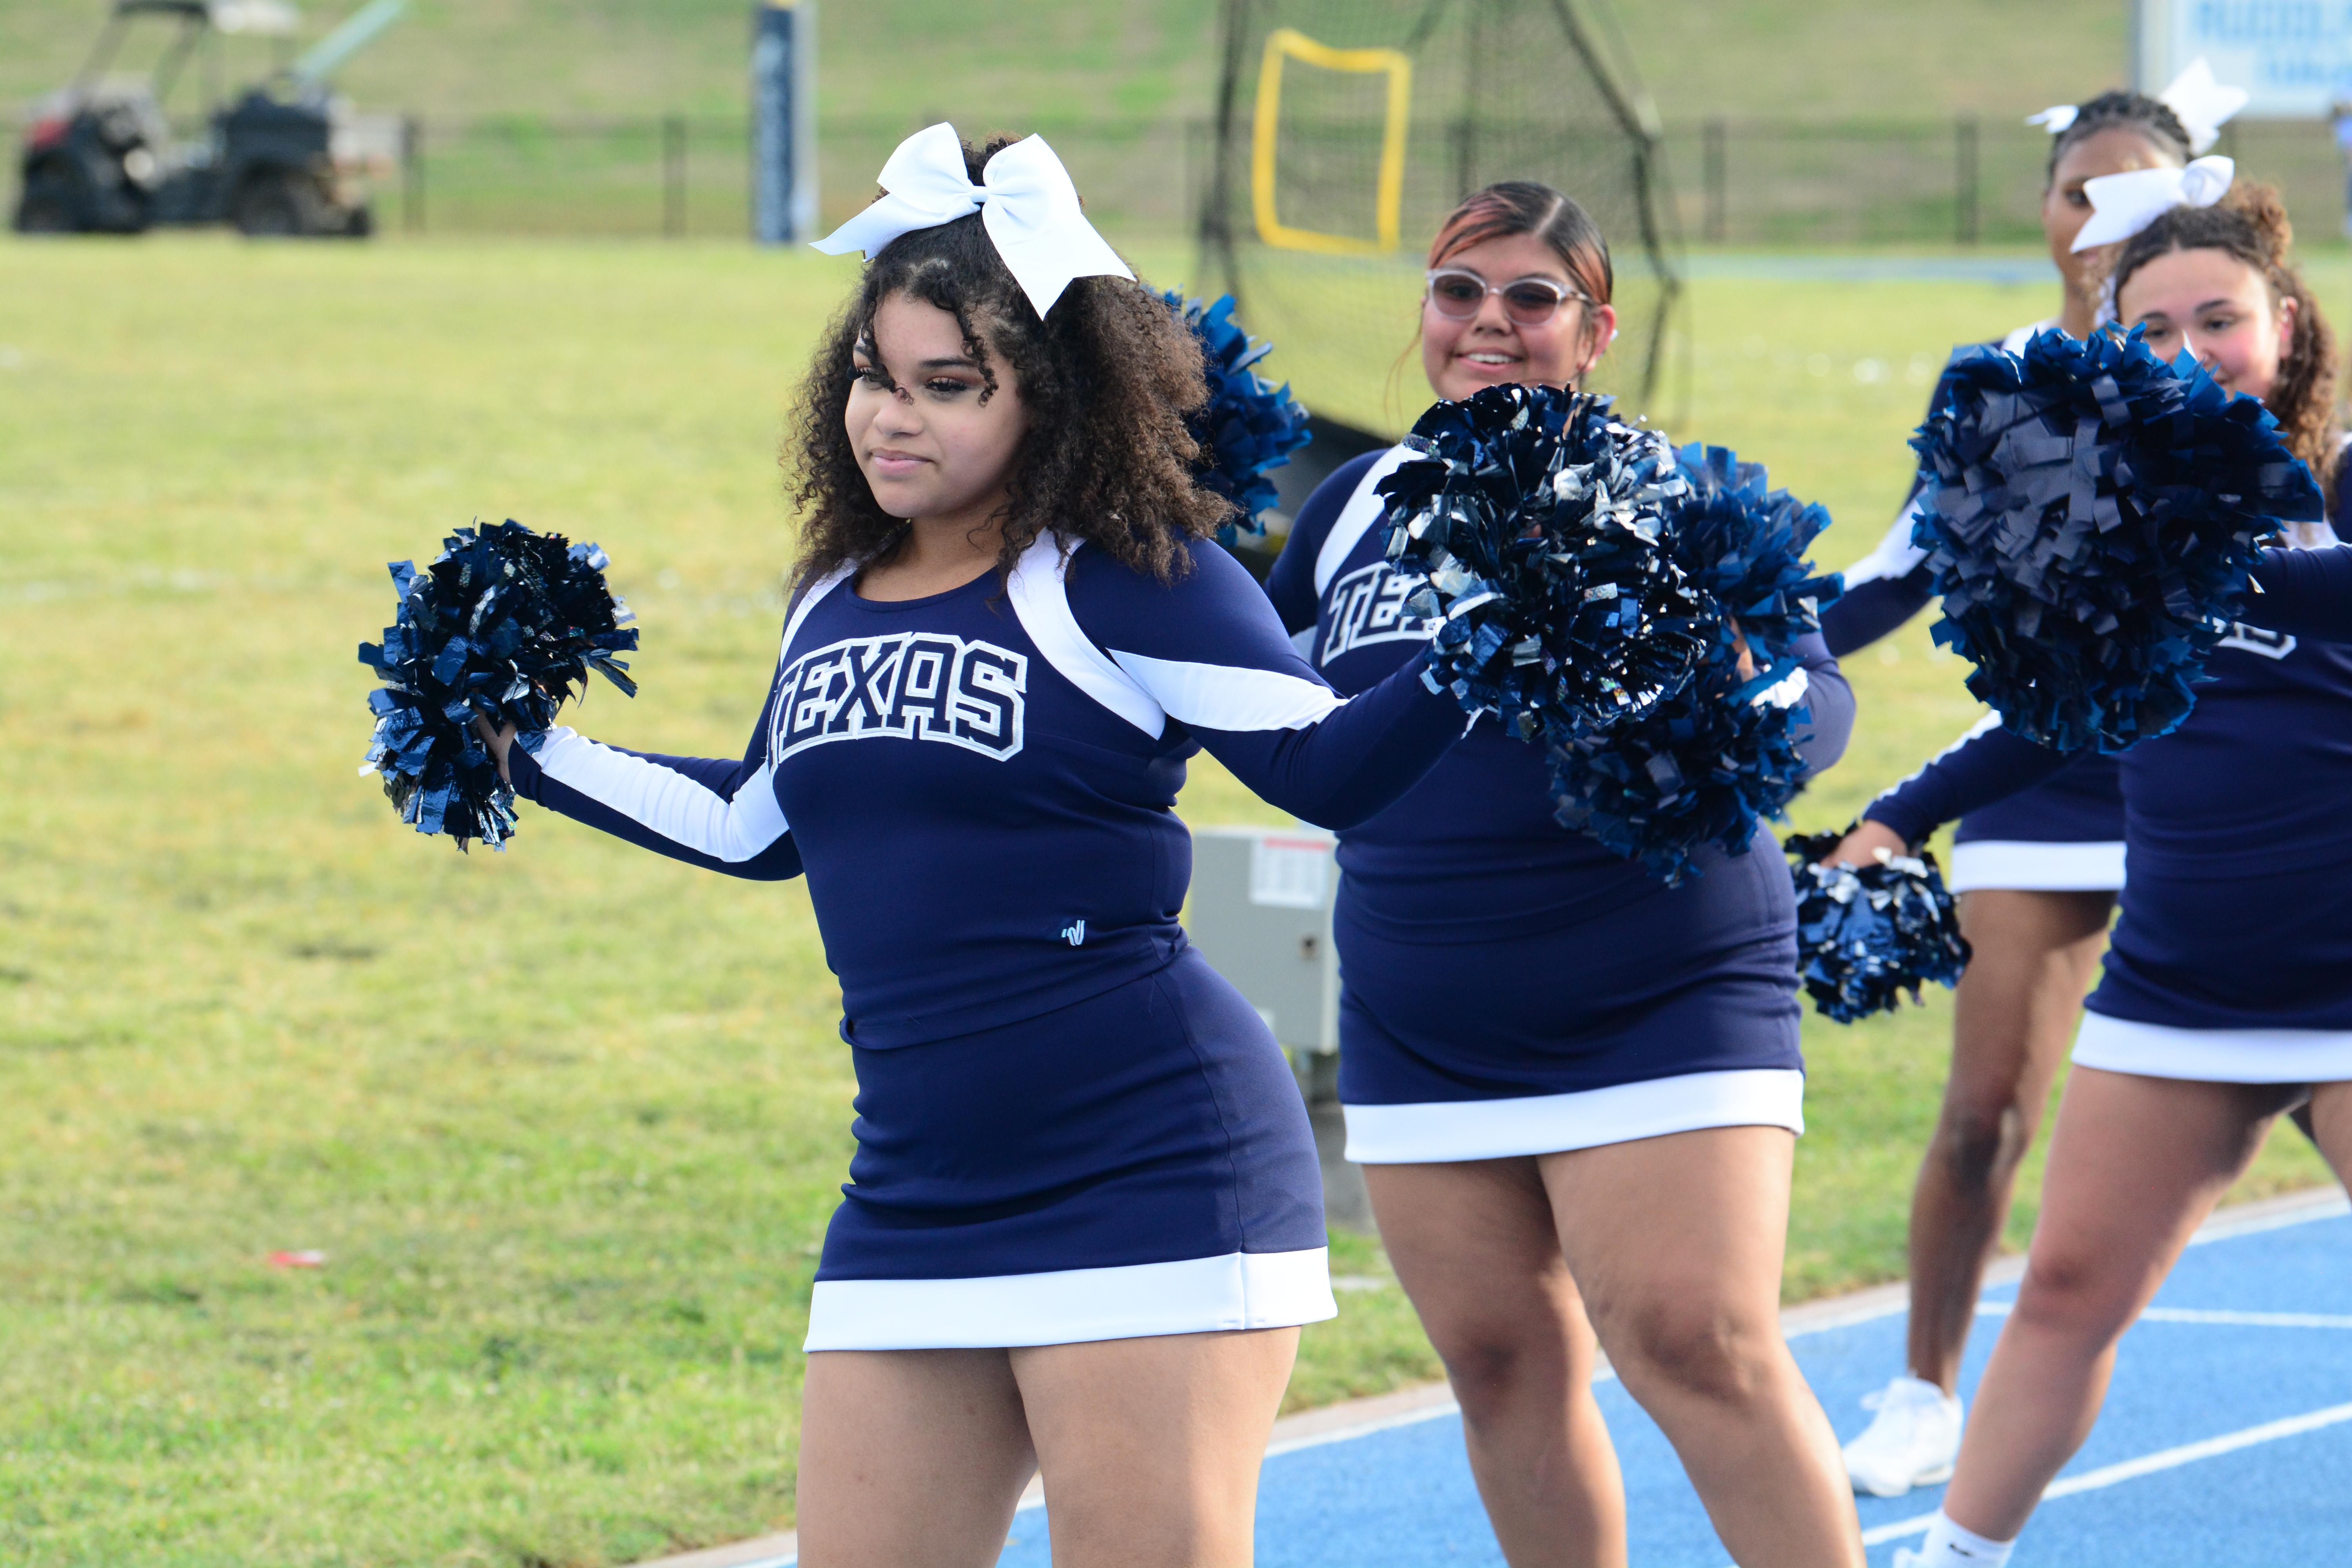 3 cheerleaders cheering for the football team, the girl in the front with black curls and white bow, wearing cheerleader uniform with “Texas” on the front.